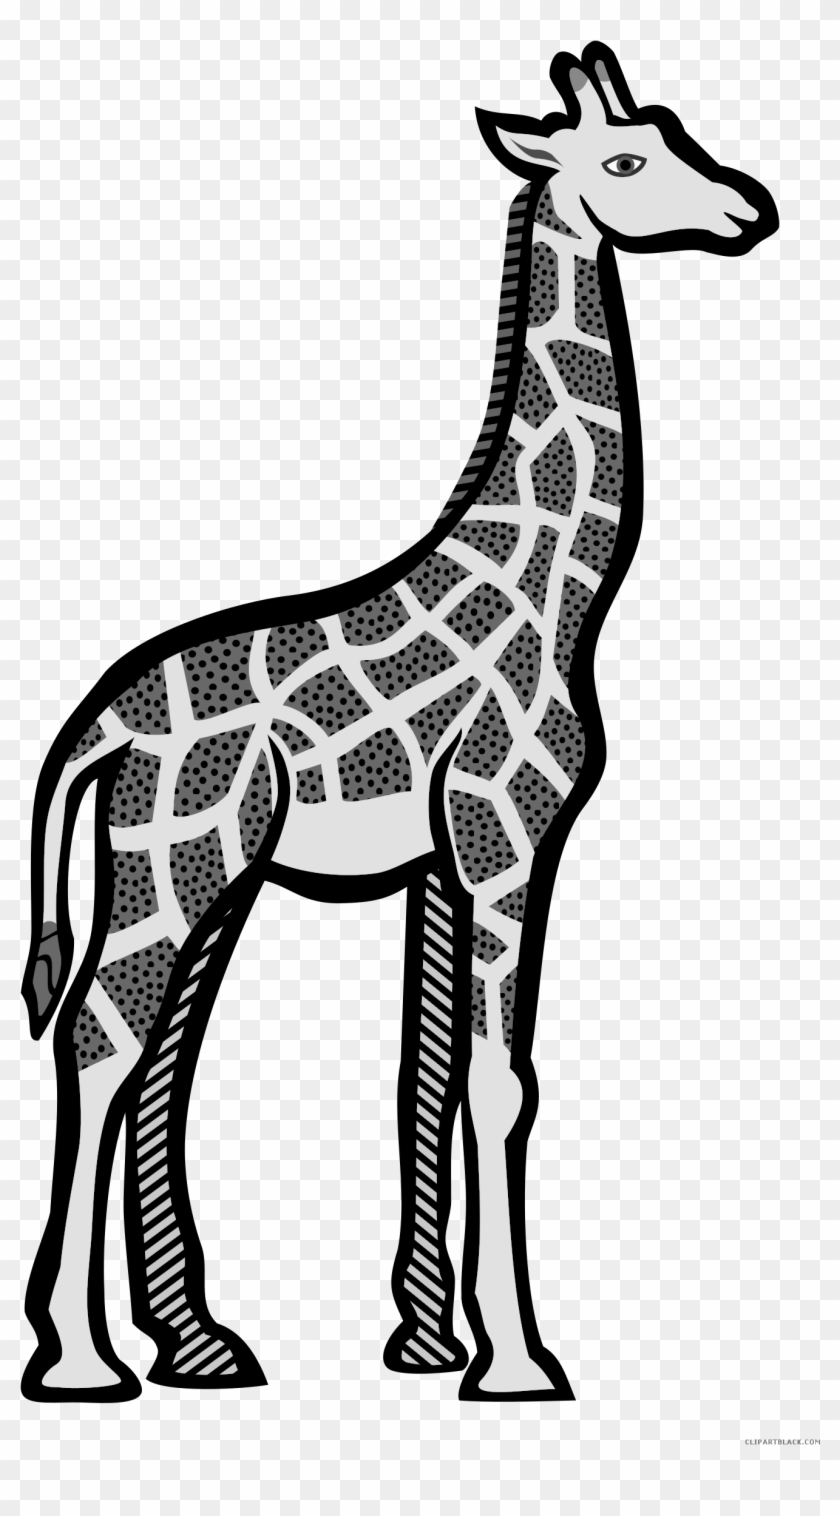 Giraffe Animal Free Black White Clipart Images Clipartblack - Carnival Of The Animals #1140501